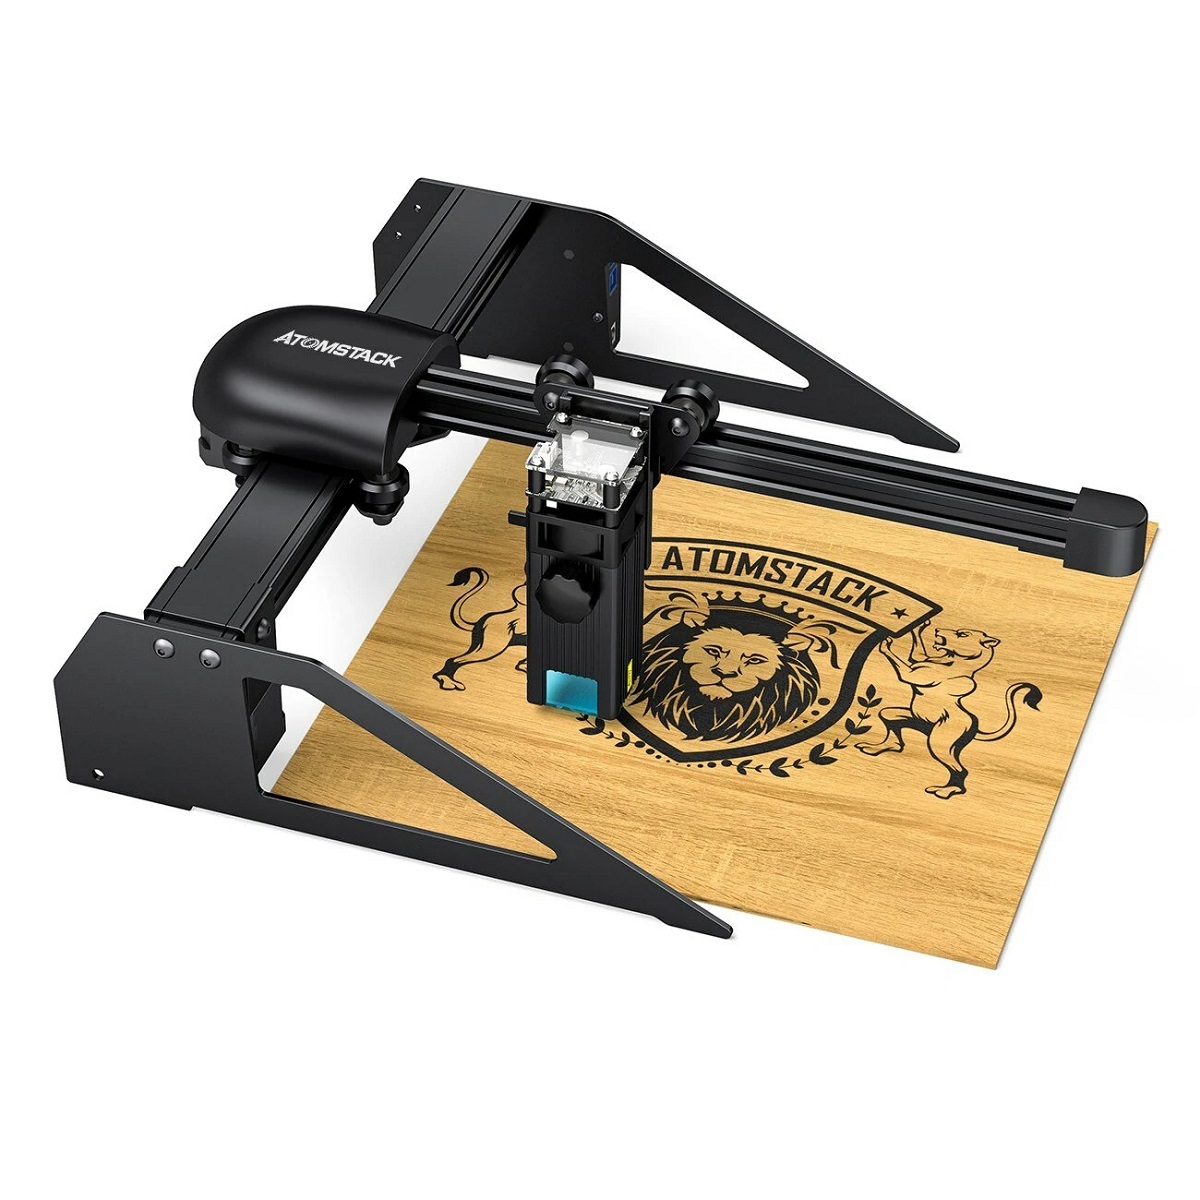 Find EU DIRECT ATOMSTACK P7 M30 Portable Laser Engraving Machine Cutter Wood Cutting Single Arm Laser Engraver Eye Protection Metal Engraving for Sale on Gipsybee.com with cryptocurrencies